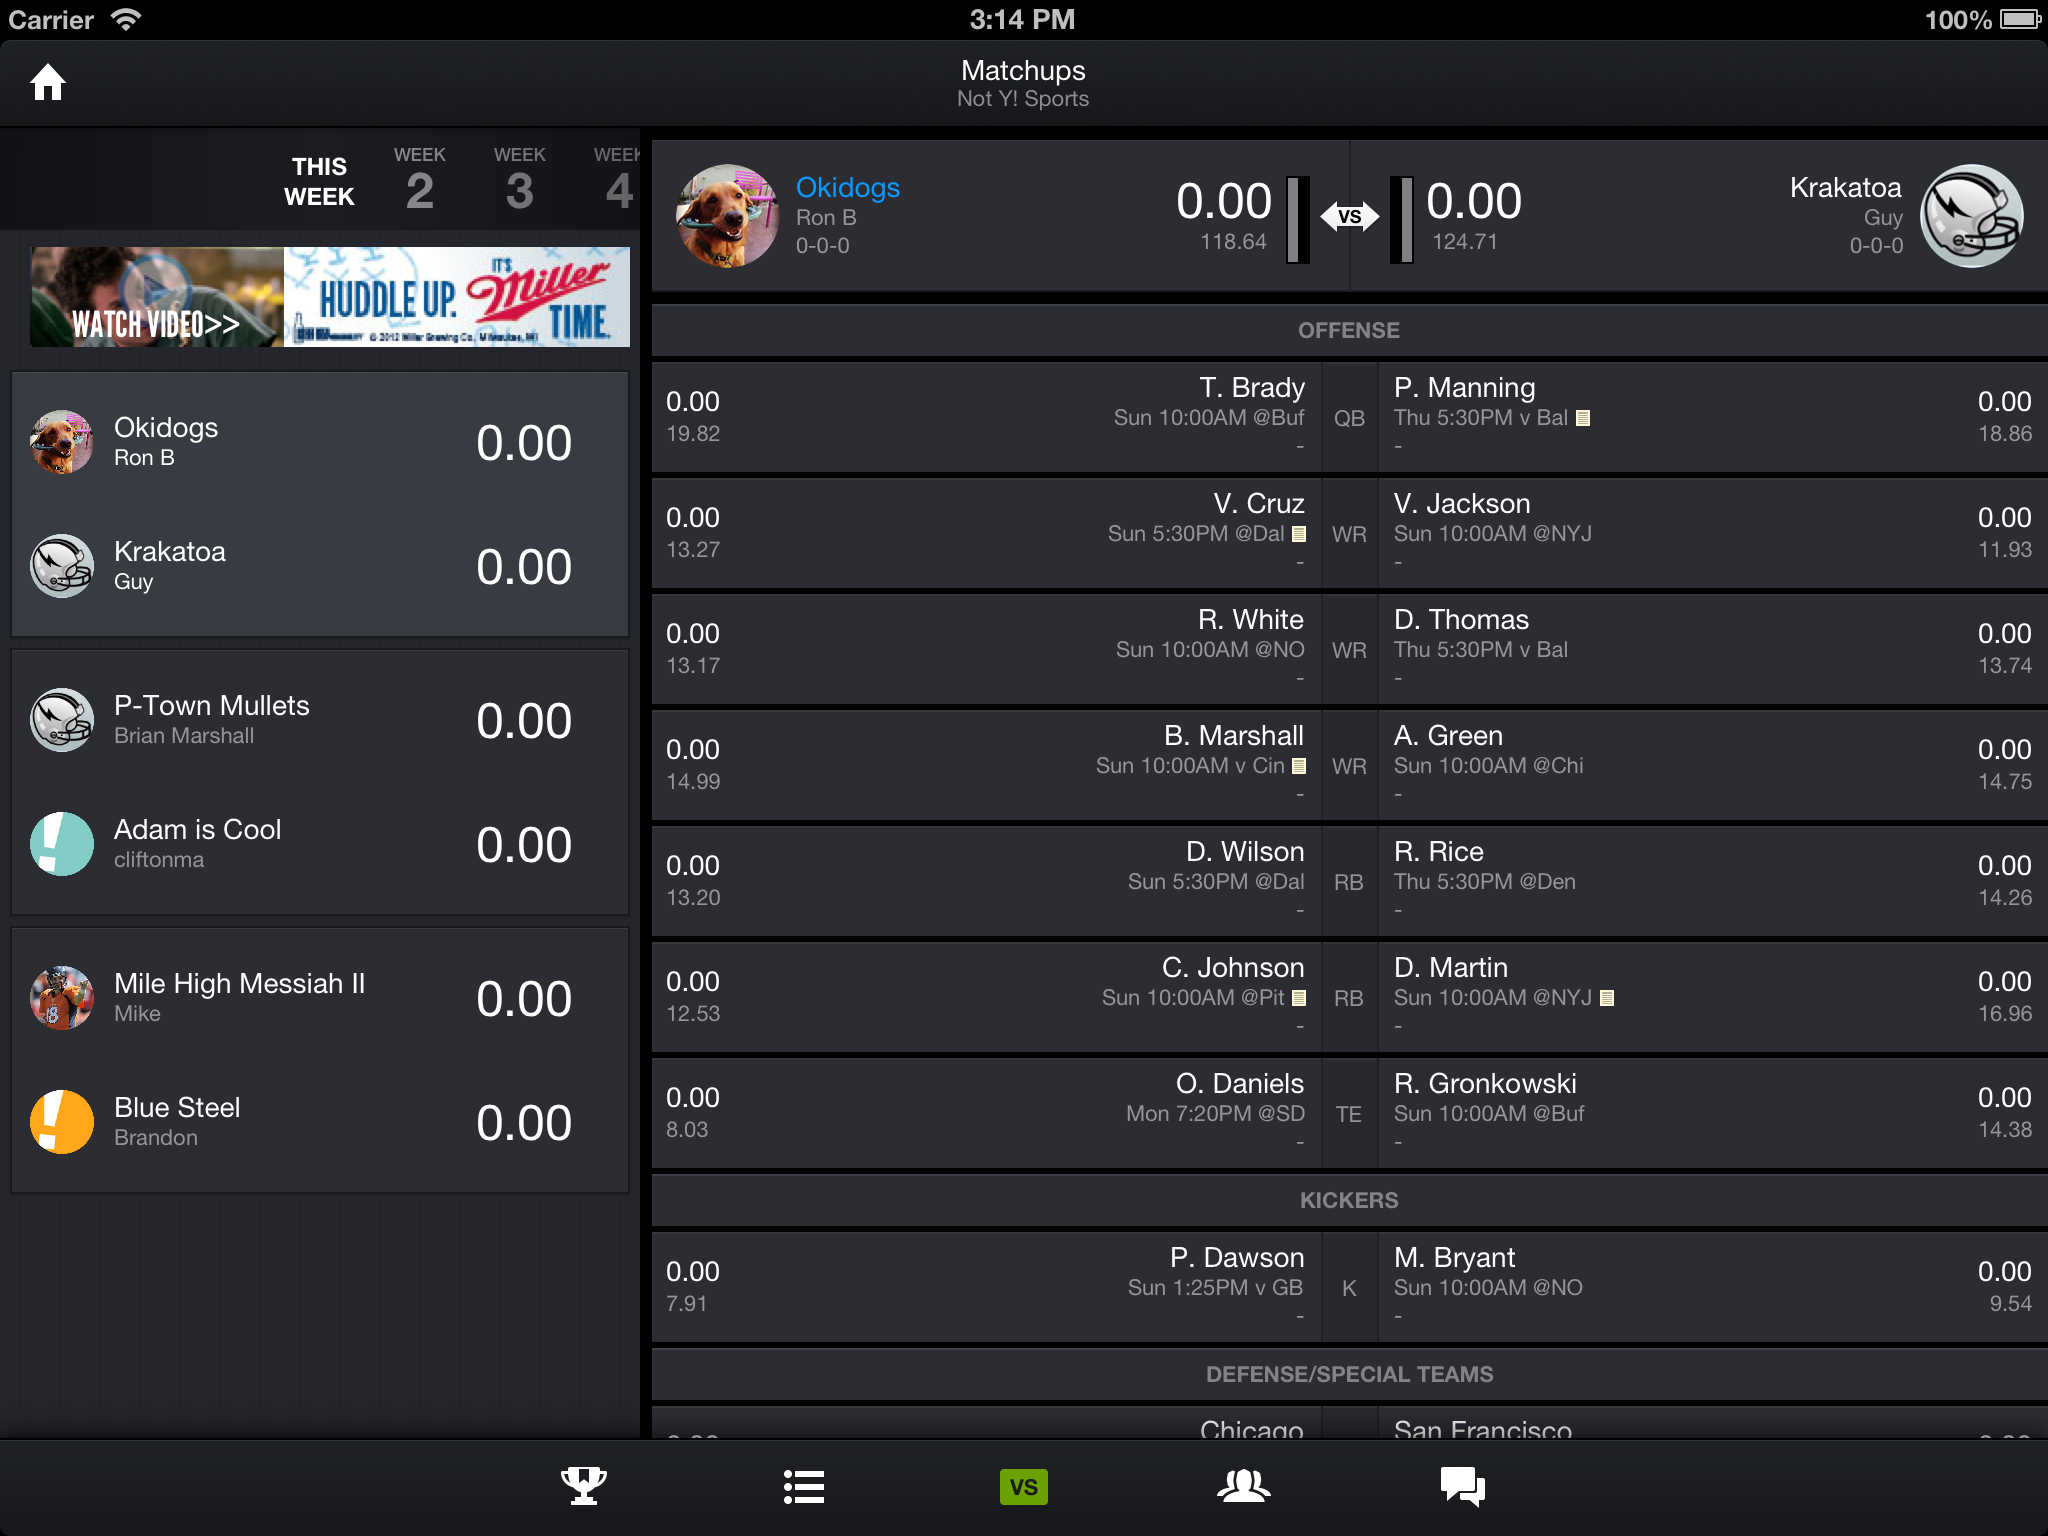 Yahoo! Fantasy Football App Completely Redesigned, Brings Mobile Draft Support